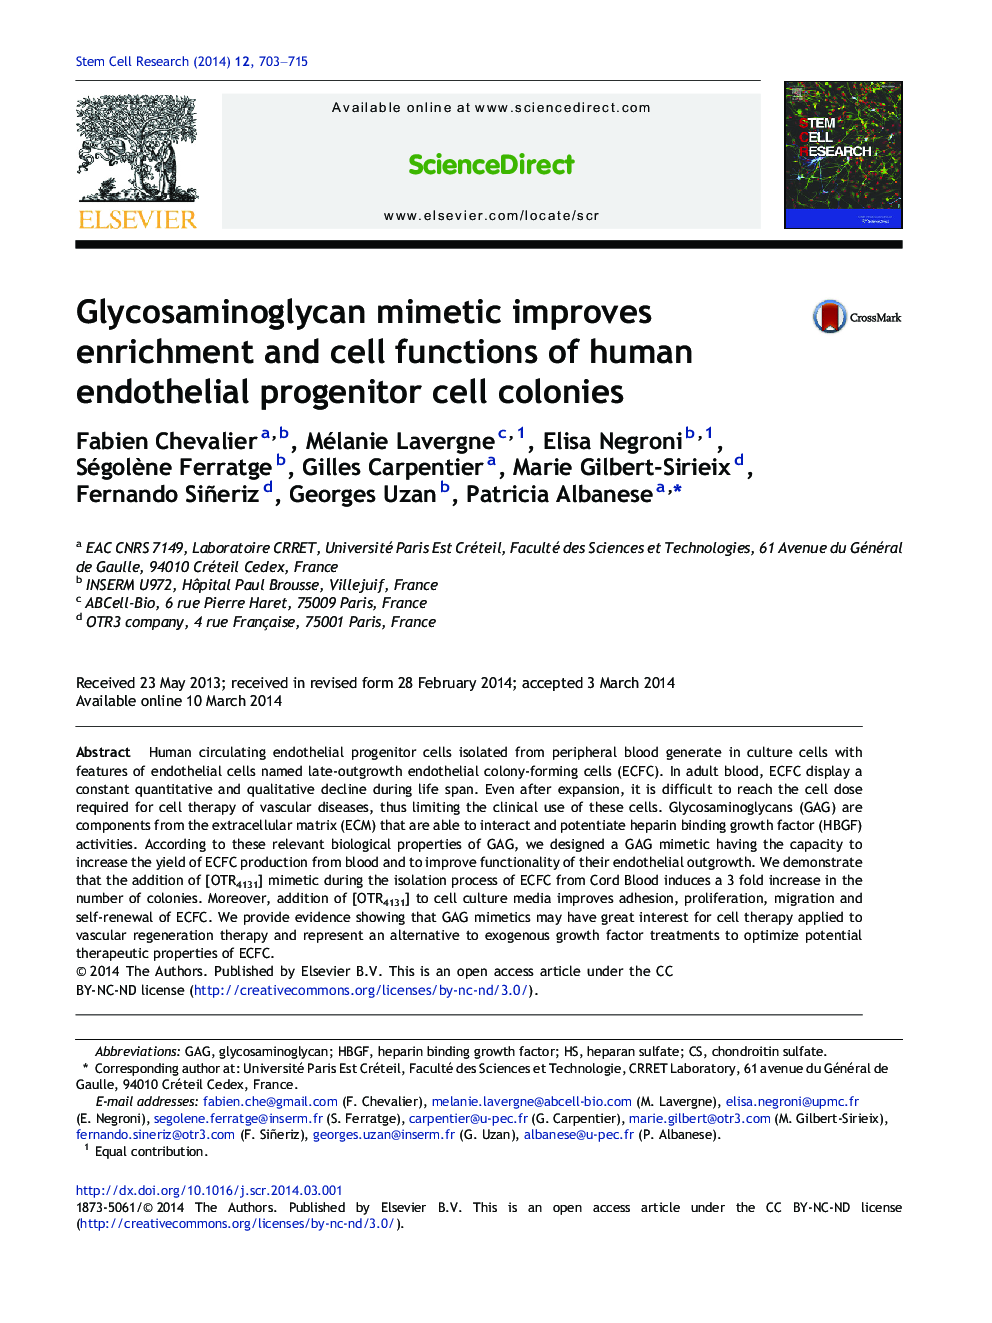 Glycosaminoglycan mimetic improves enrichment and cell functions of human endothelial progenitor cell colonies